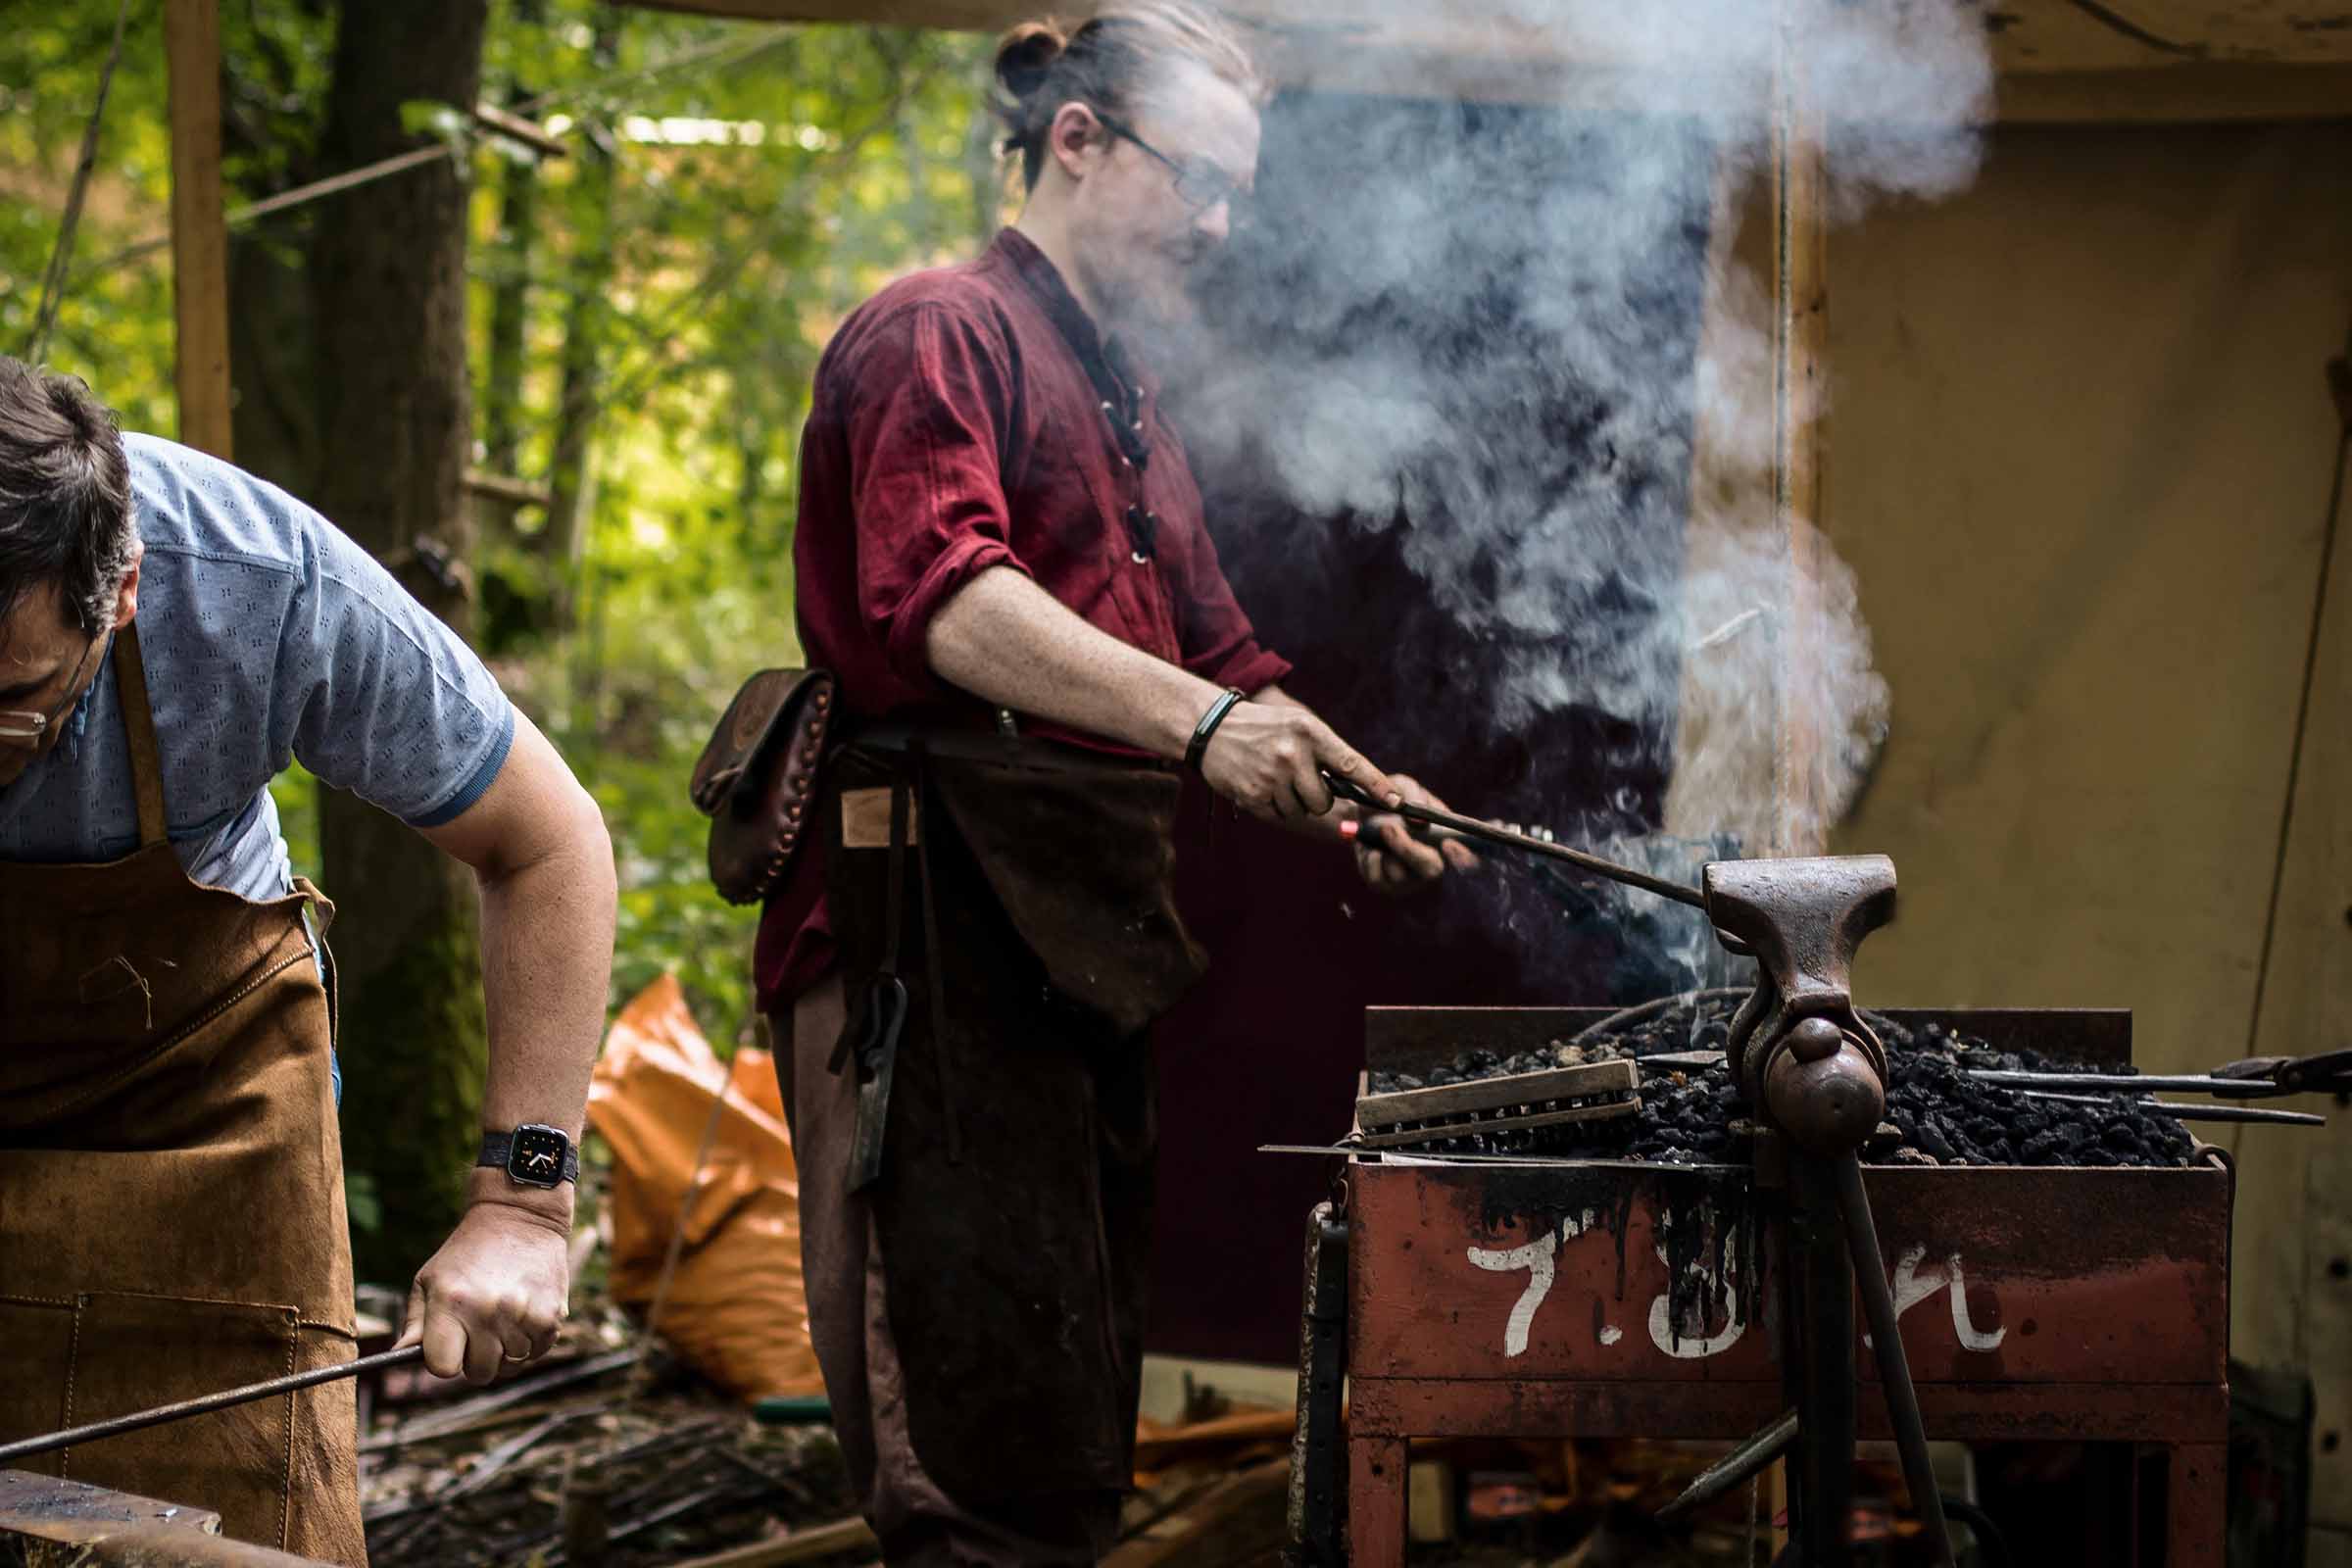 A blacksmith forges steel during a workshop at Loxwood Joust Festival